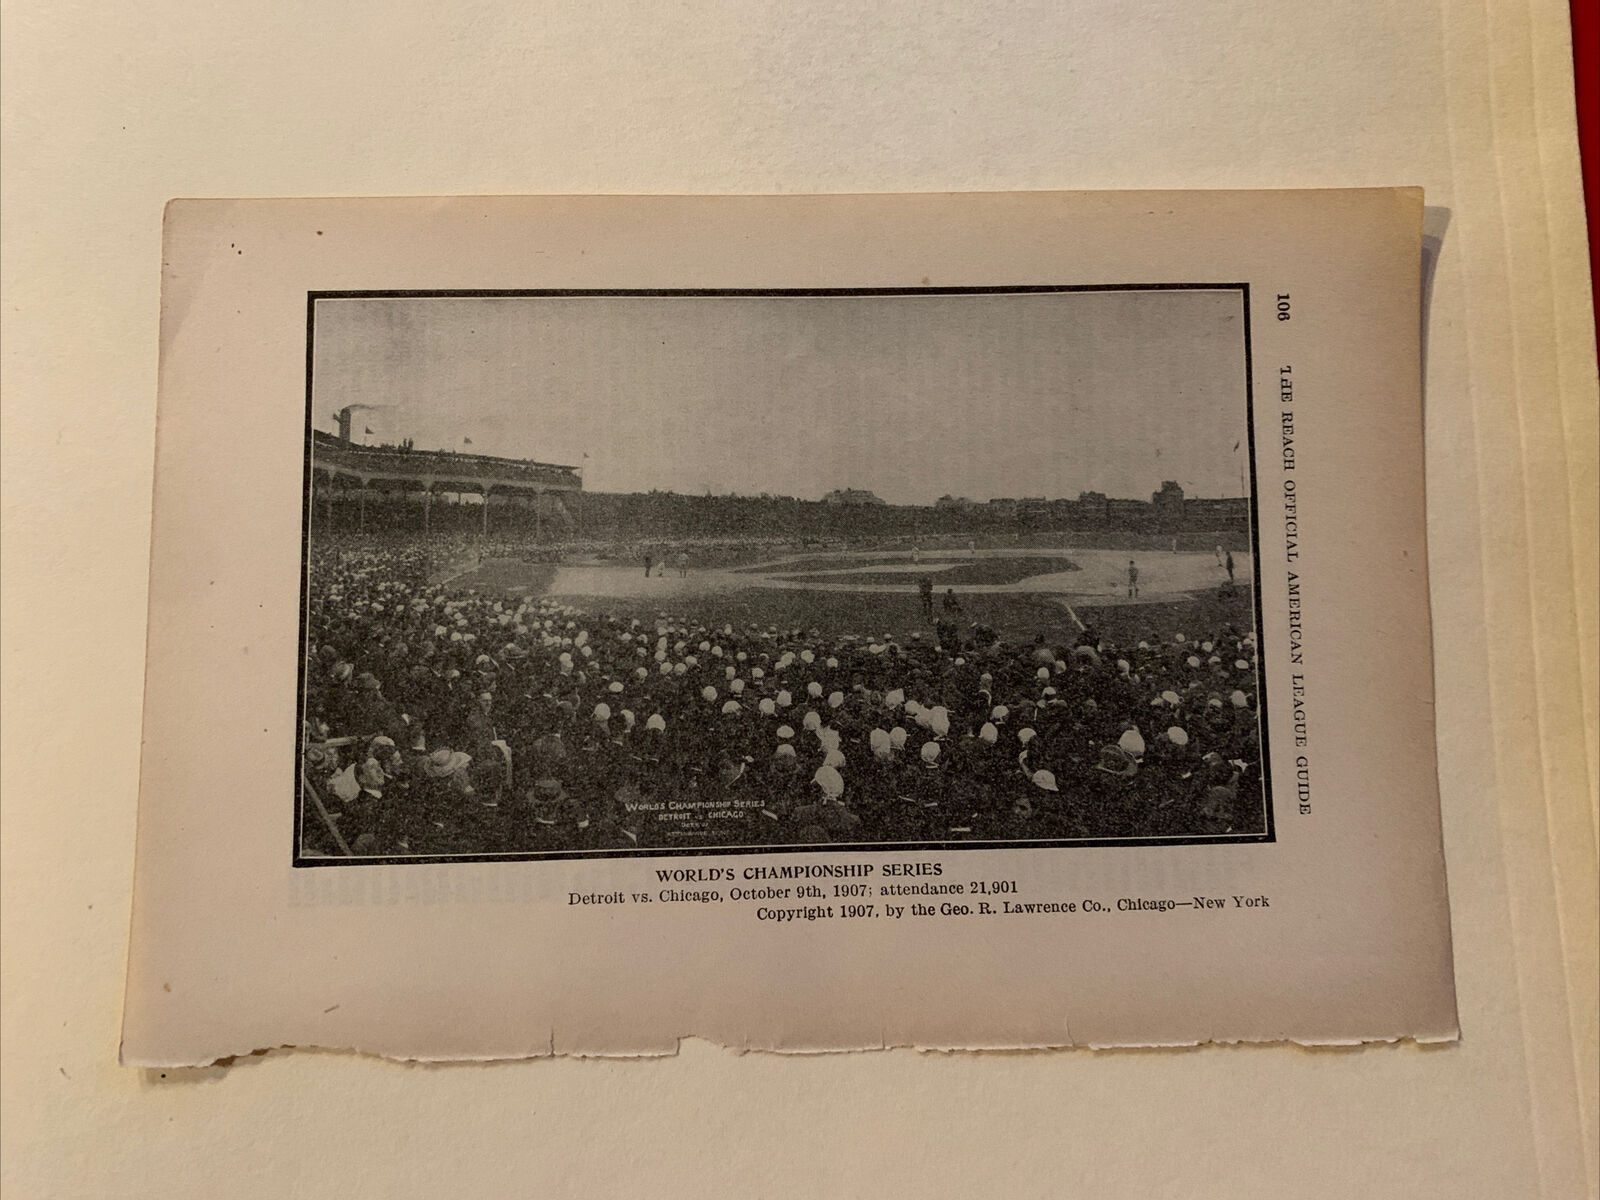 Detroit Tigers Chicago Cubs World Series October 9th 1907 Baseball 5X7 Picture